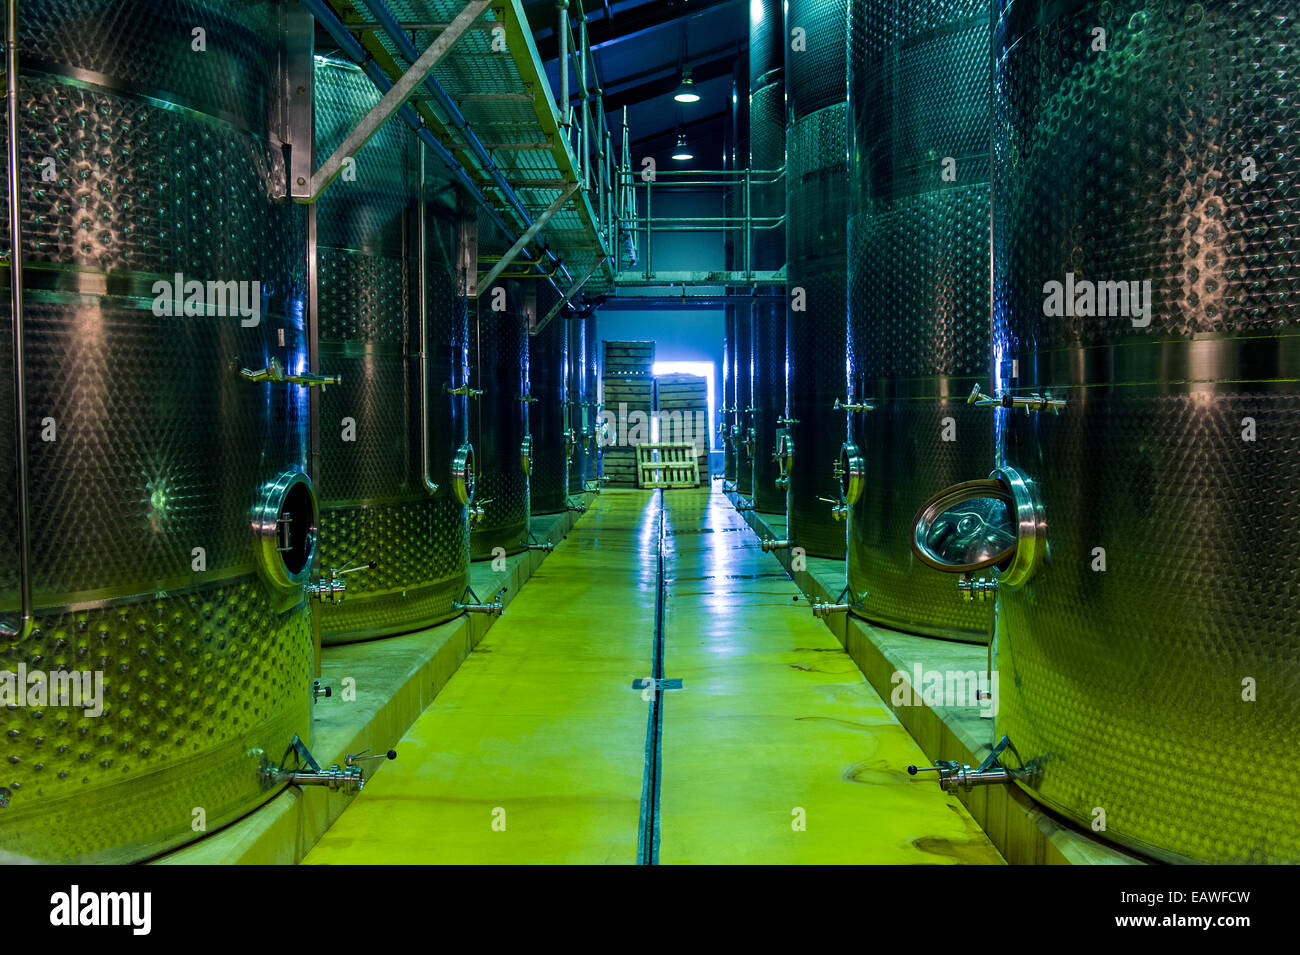 A winery uses sterile stainless steel tanks to ferment the wine. Stock Photo